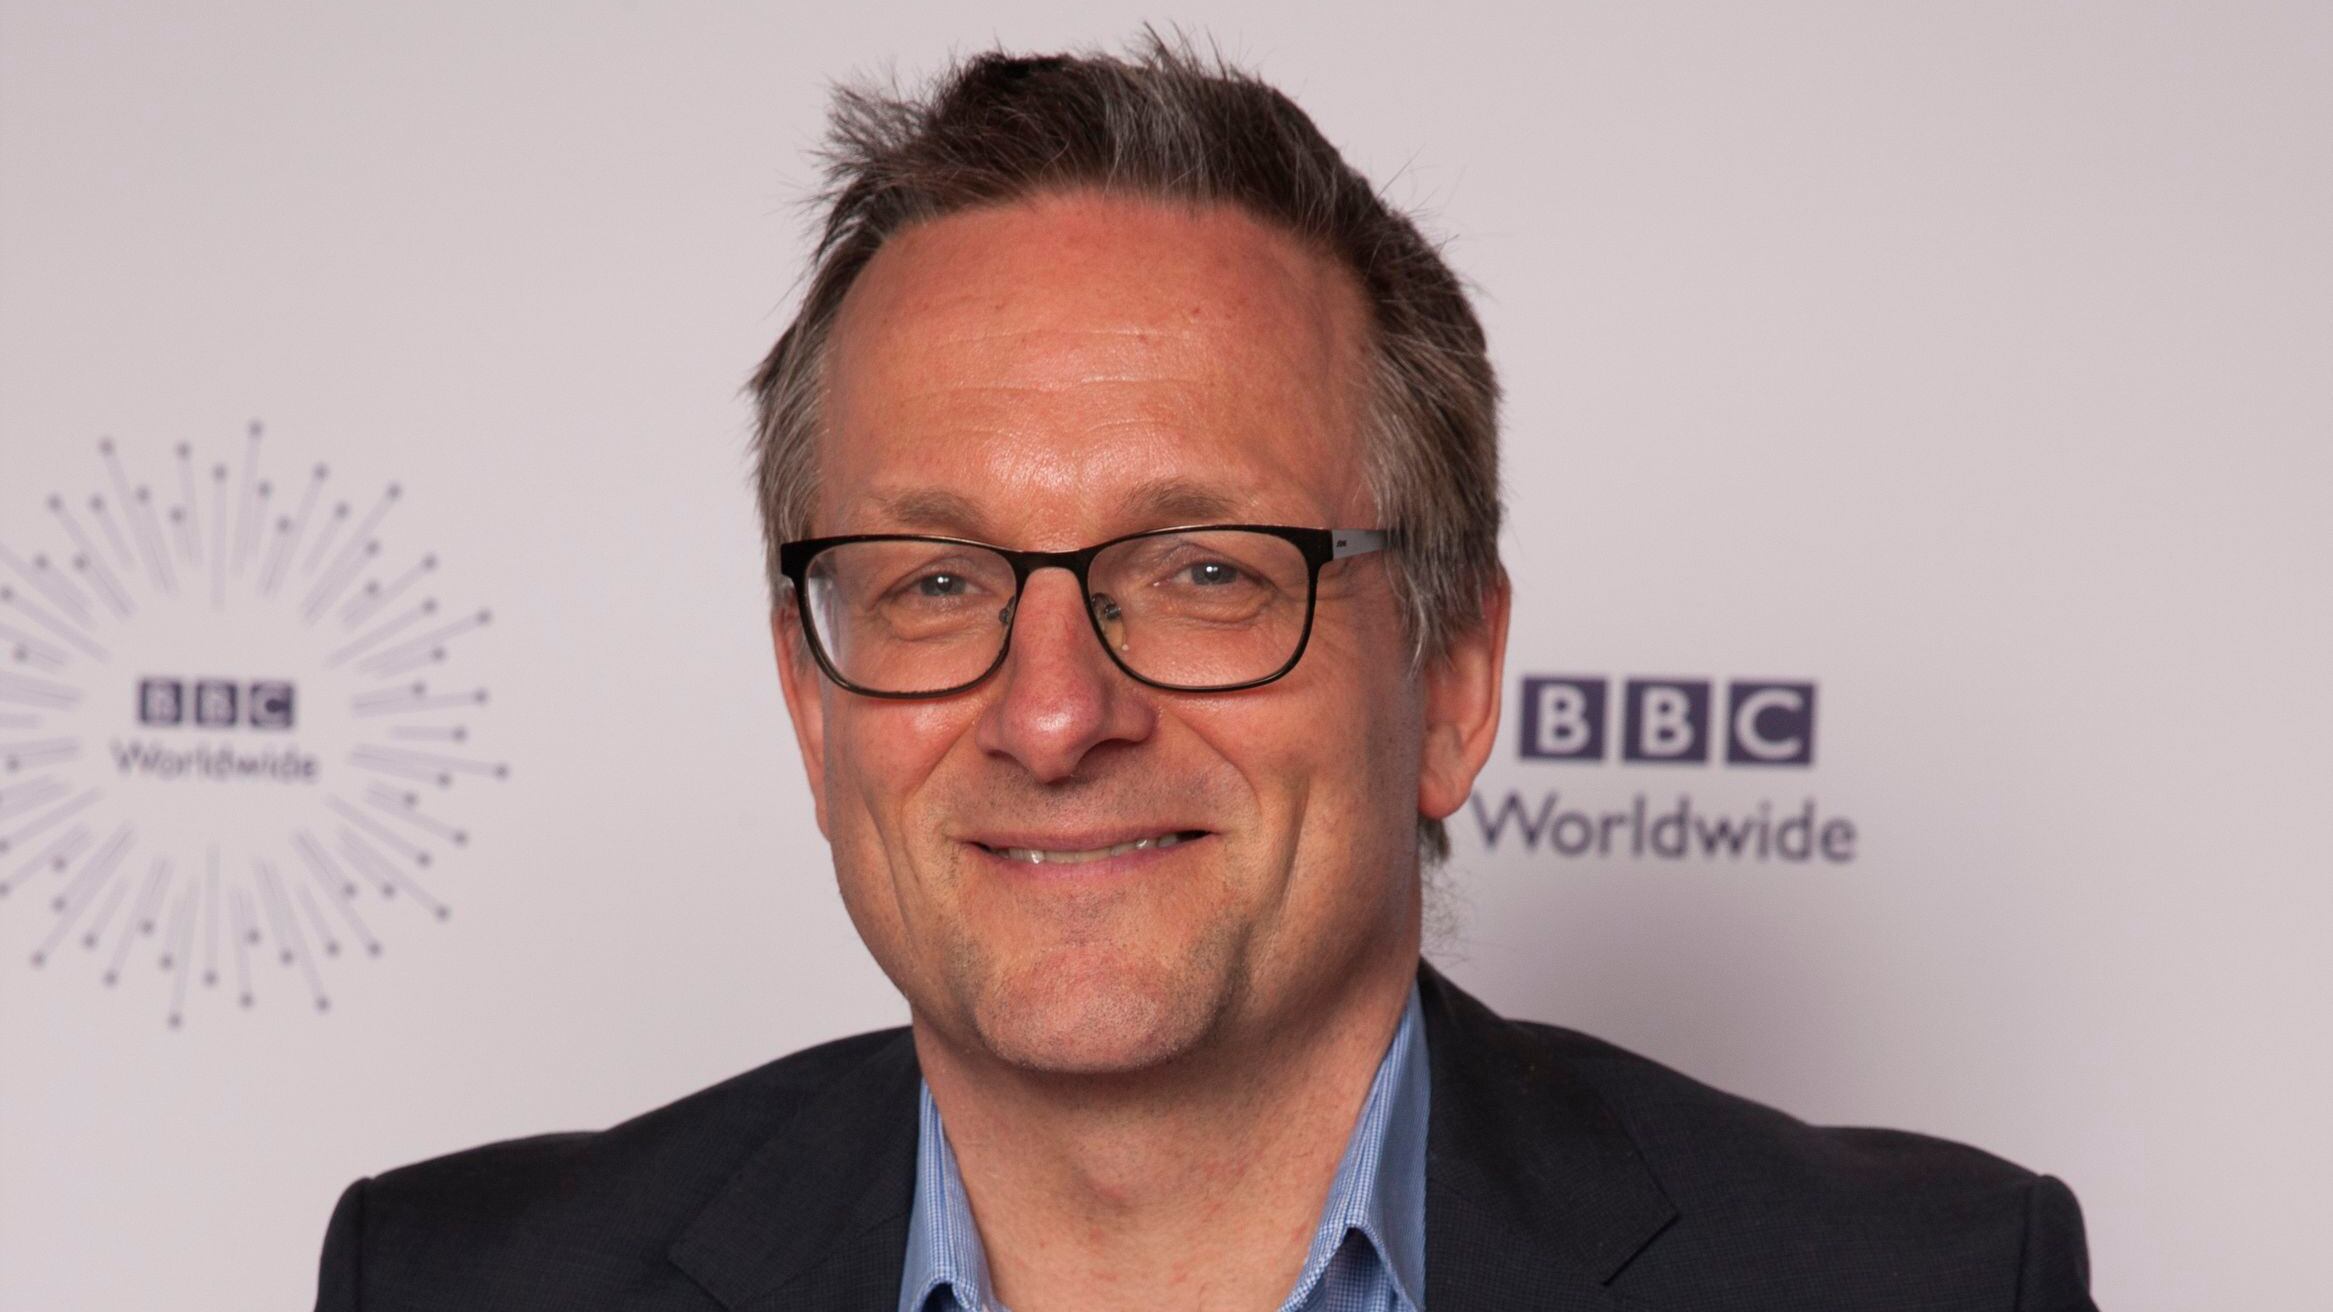 TV doctor and columnist Michael Mosley has been missing since Wednesday